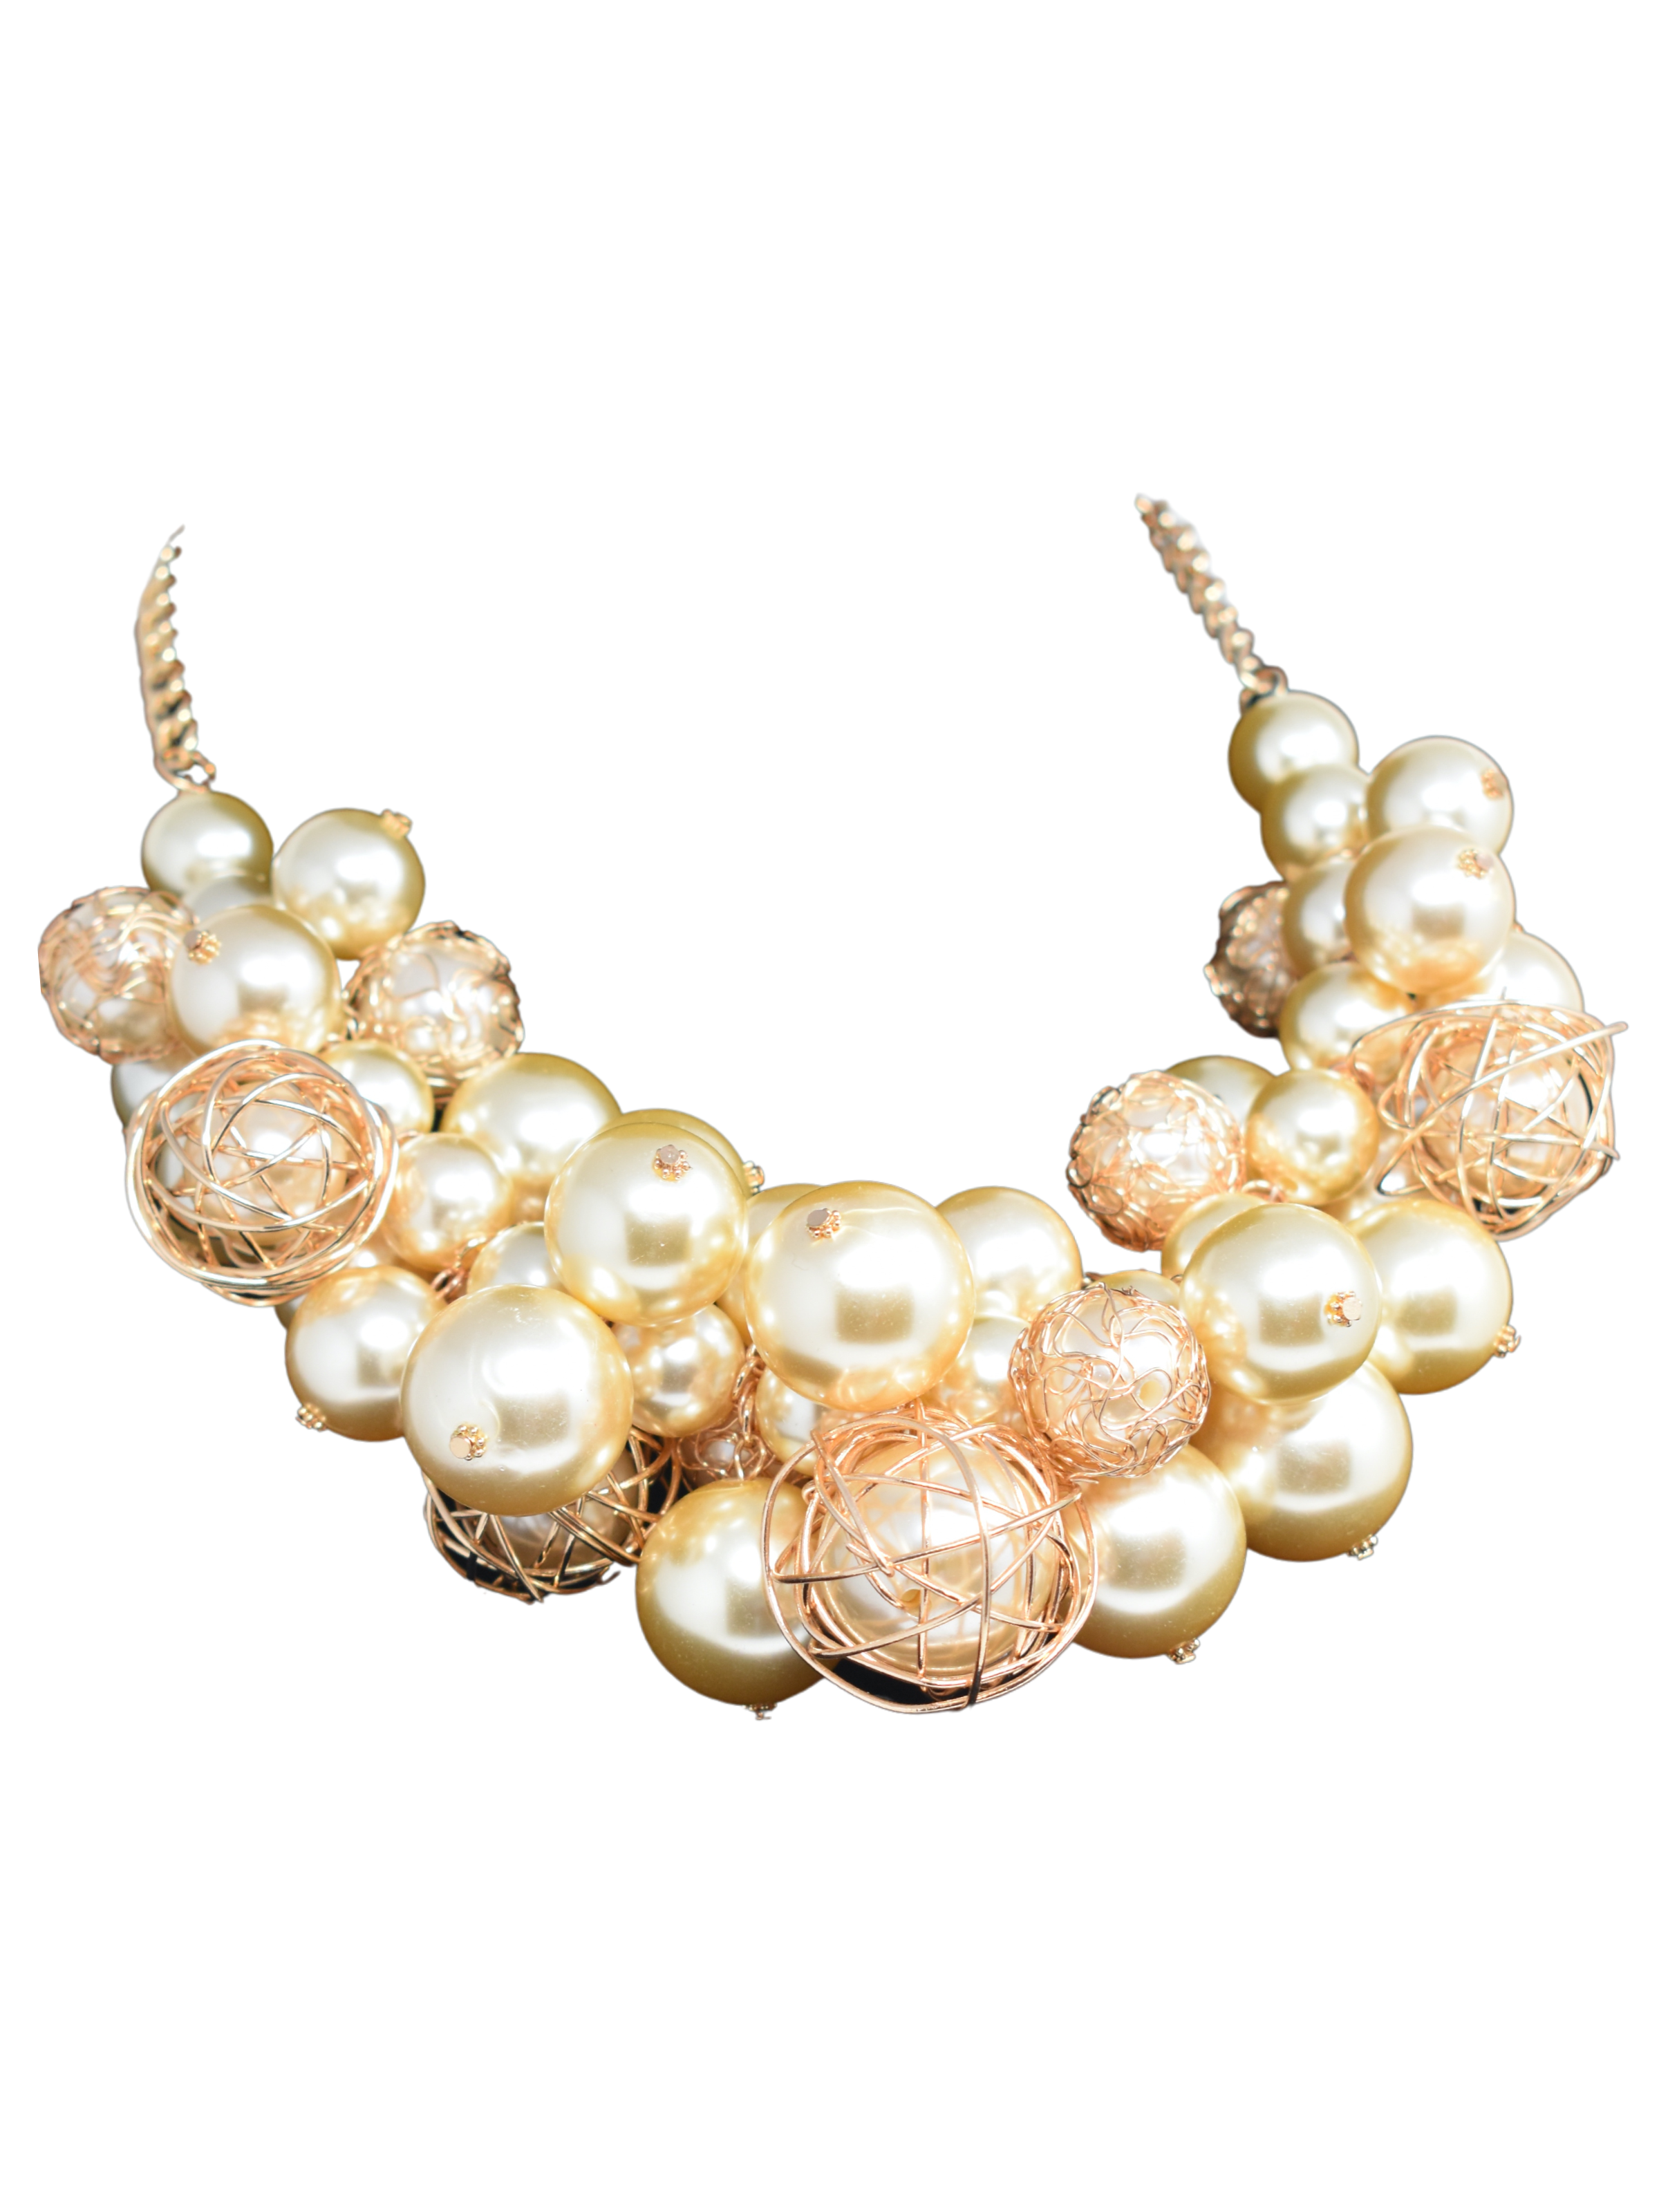 Stylish and Sweet our Aspen cluster of pearl Bib Statement necklace is such a treat.